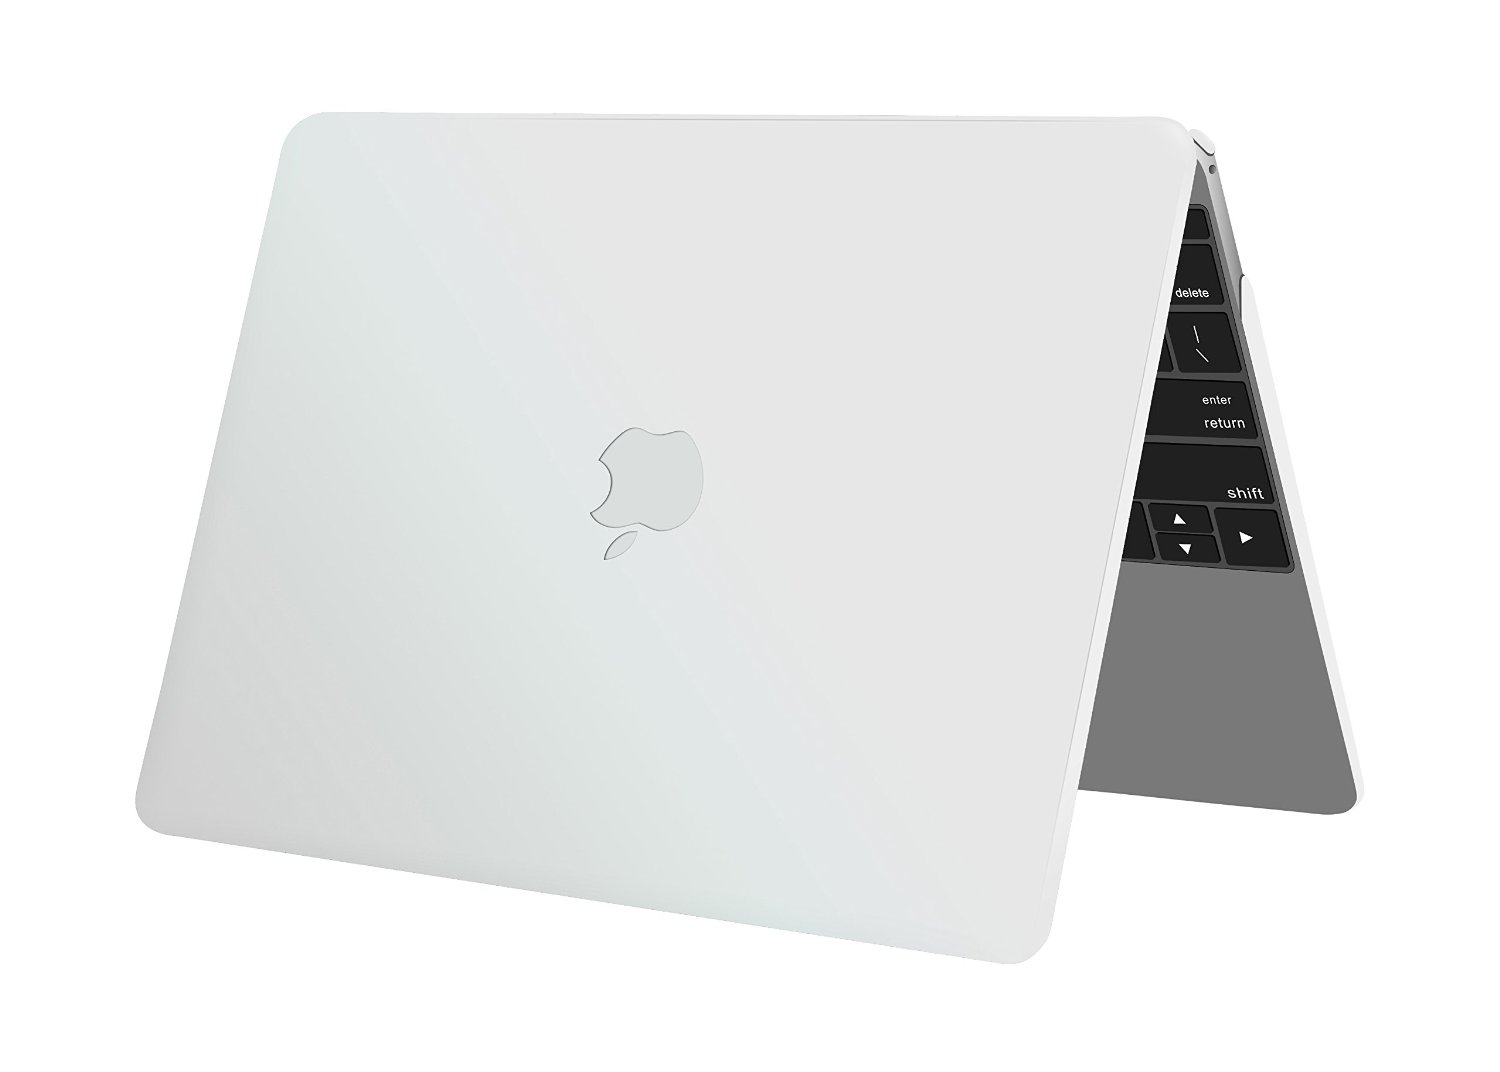 MacBook Pro Review: Votech White Case | GiveMeApps